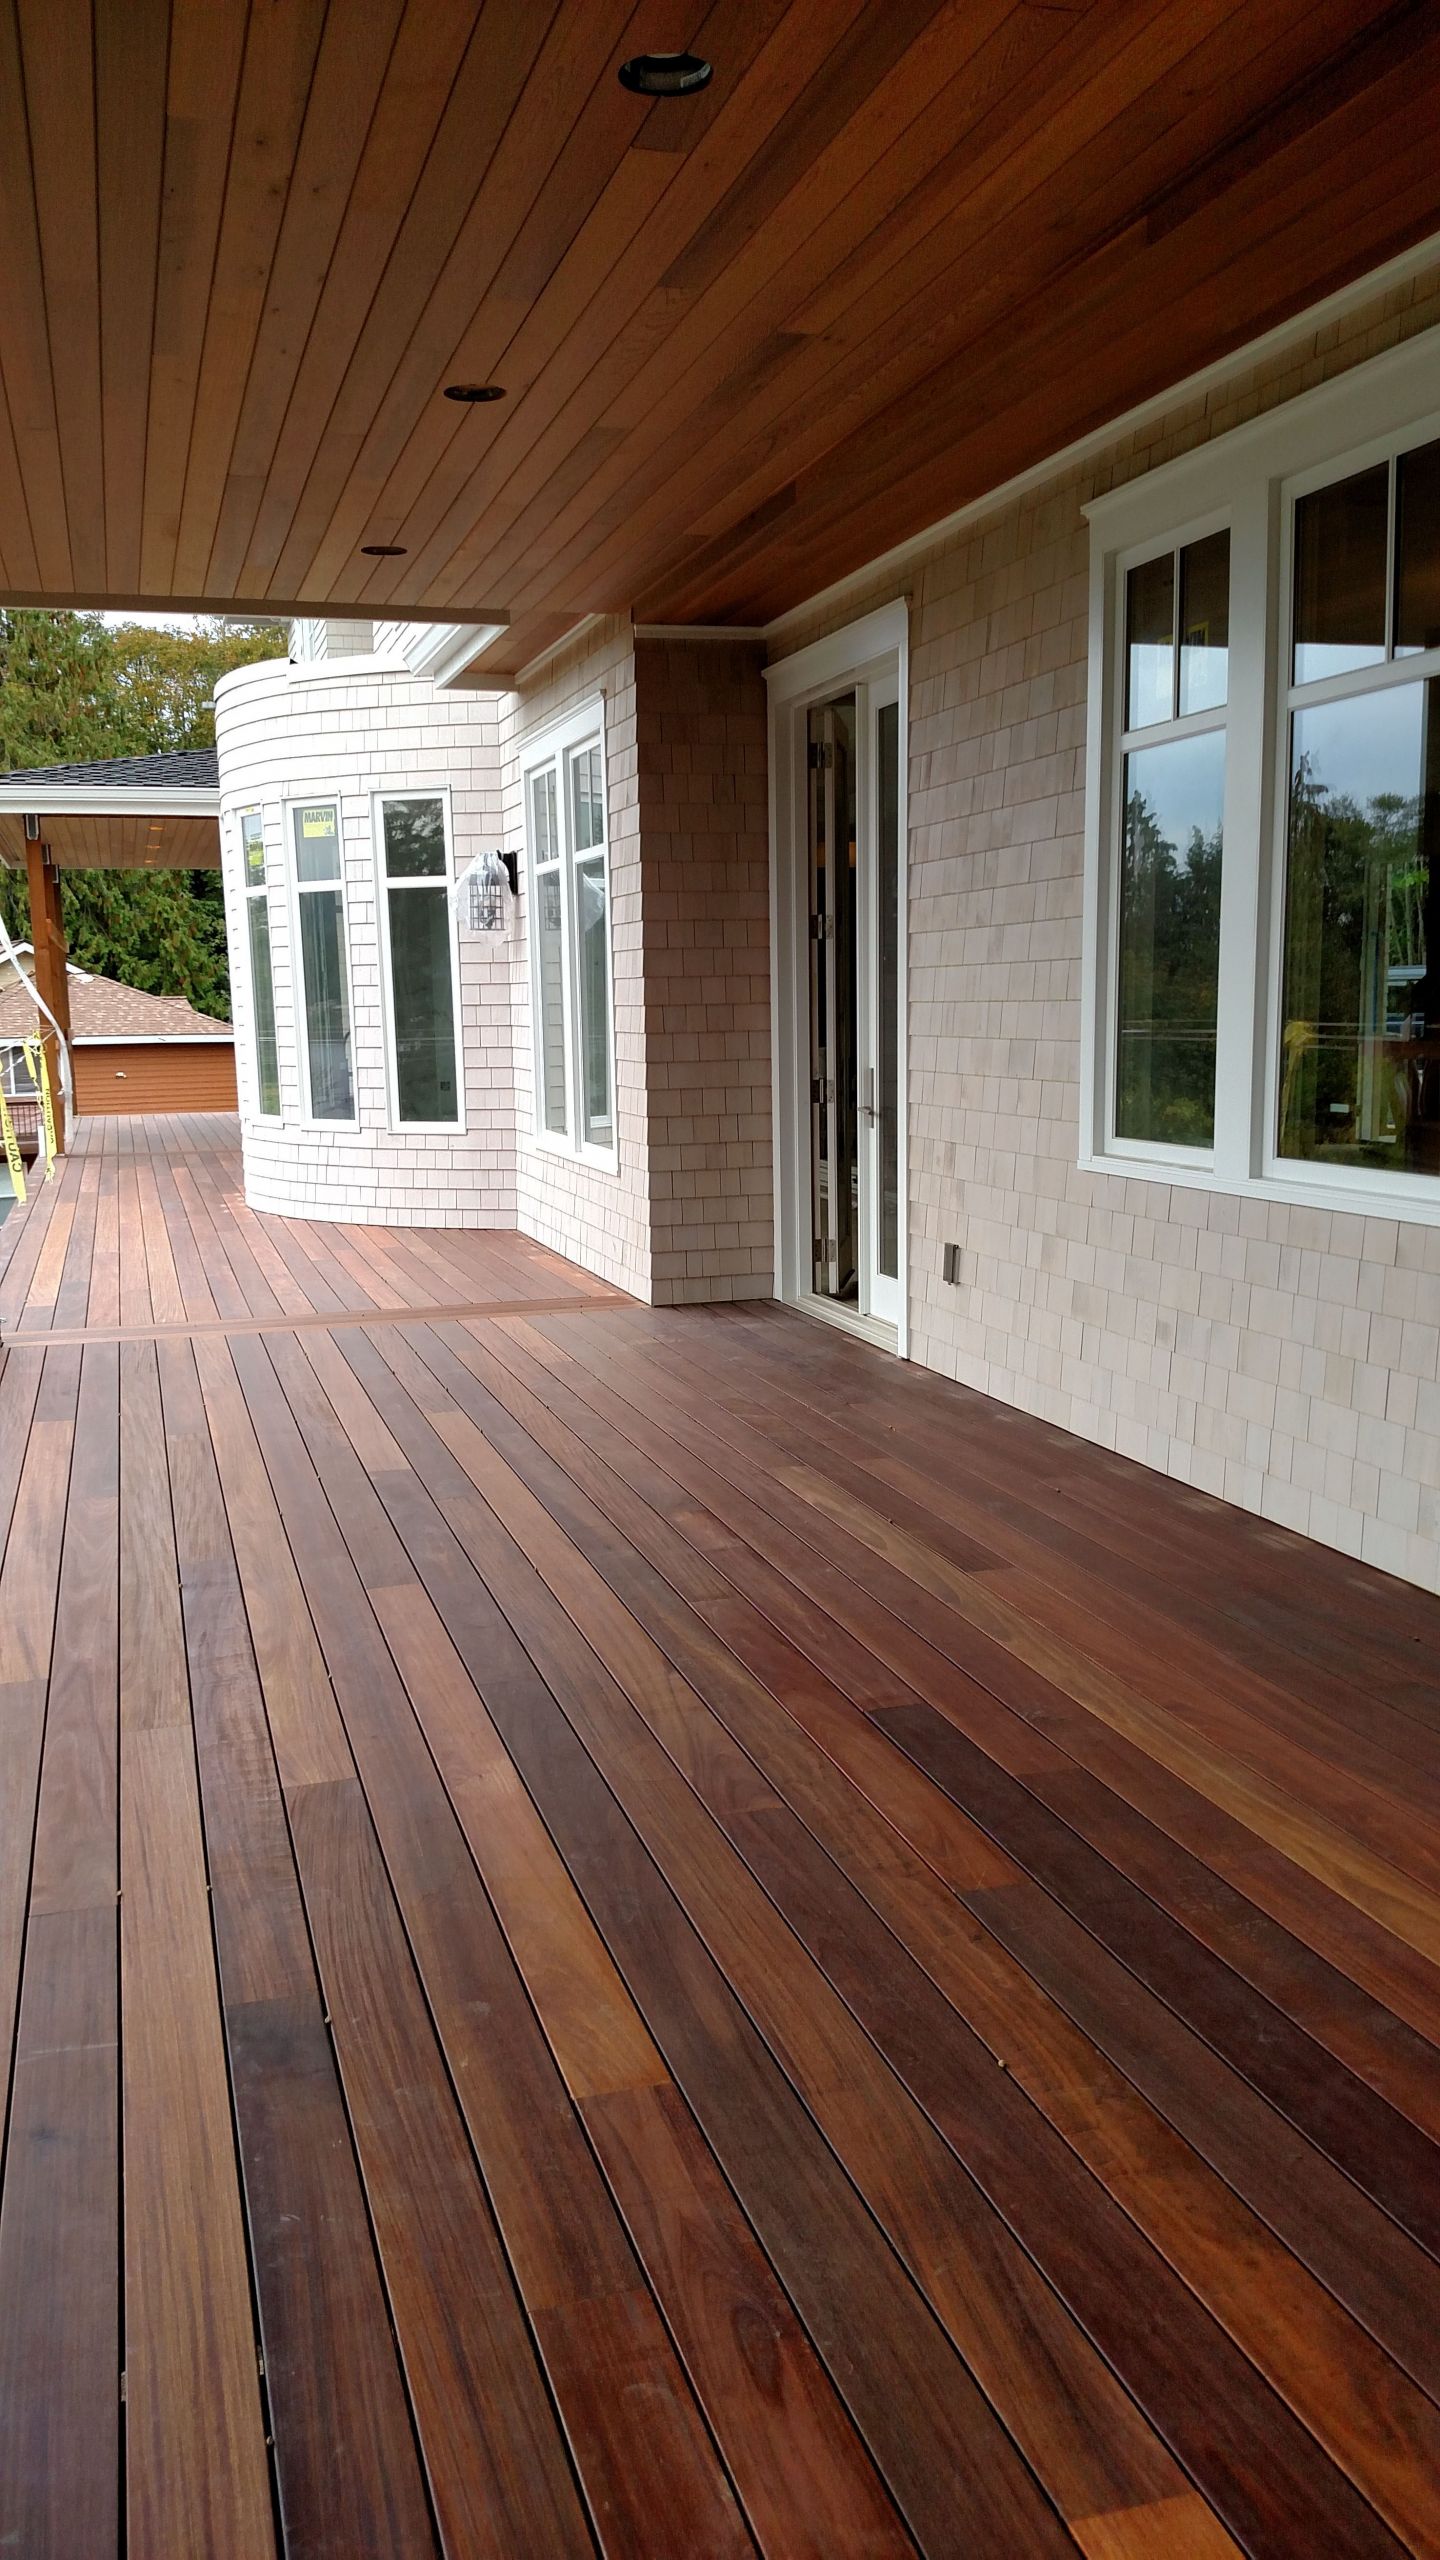 Wood Deck Paint Colors
 Make your Deck e Anew with Cool Deck Stain Colors